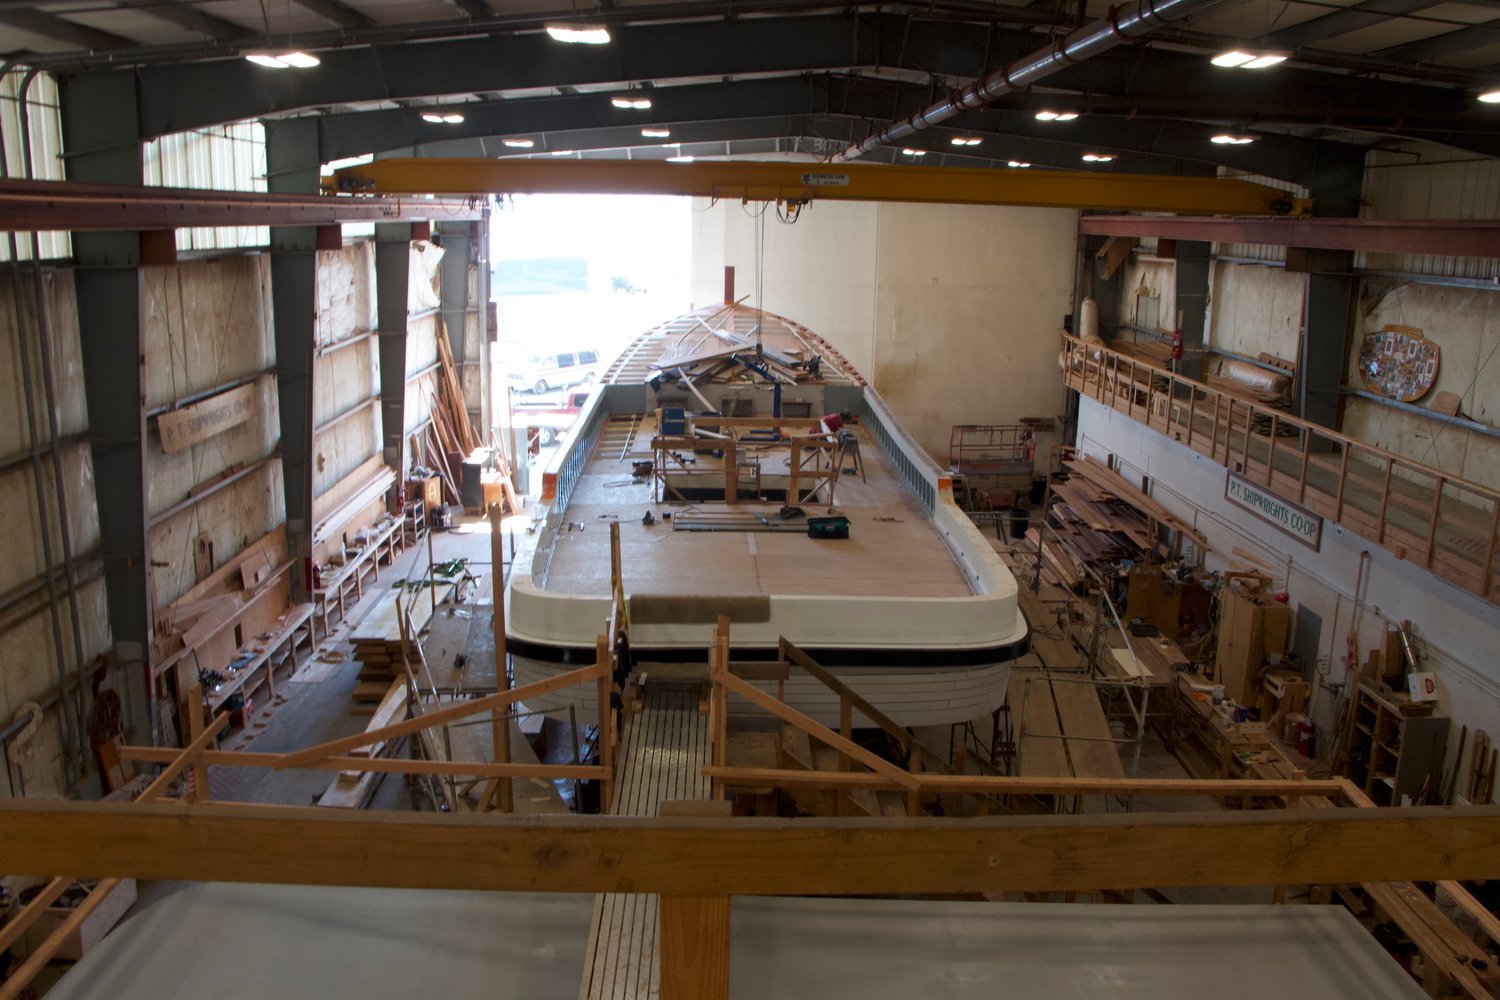 The Western Flyer, photographed from the stern as it undergoes repairs at the Port Townsend Shipwrights Co-Op.